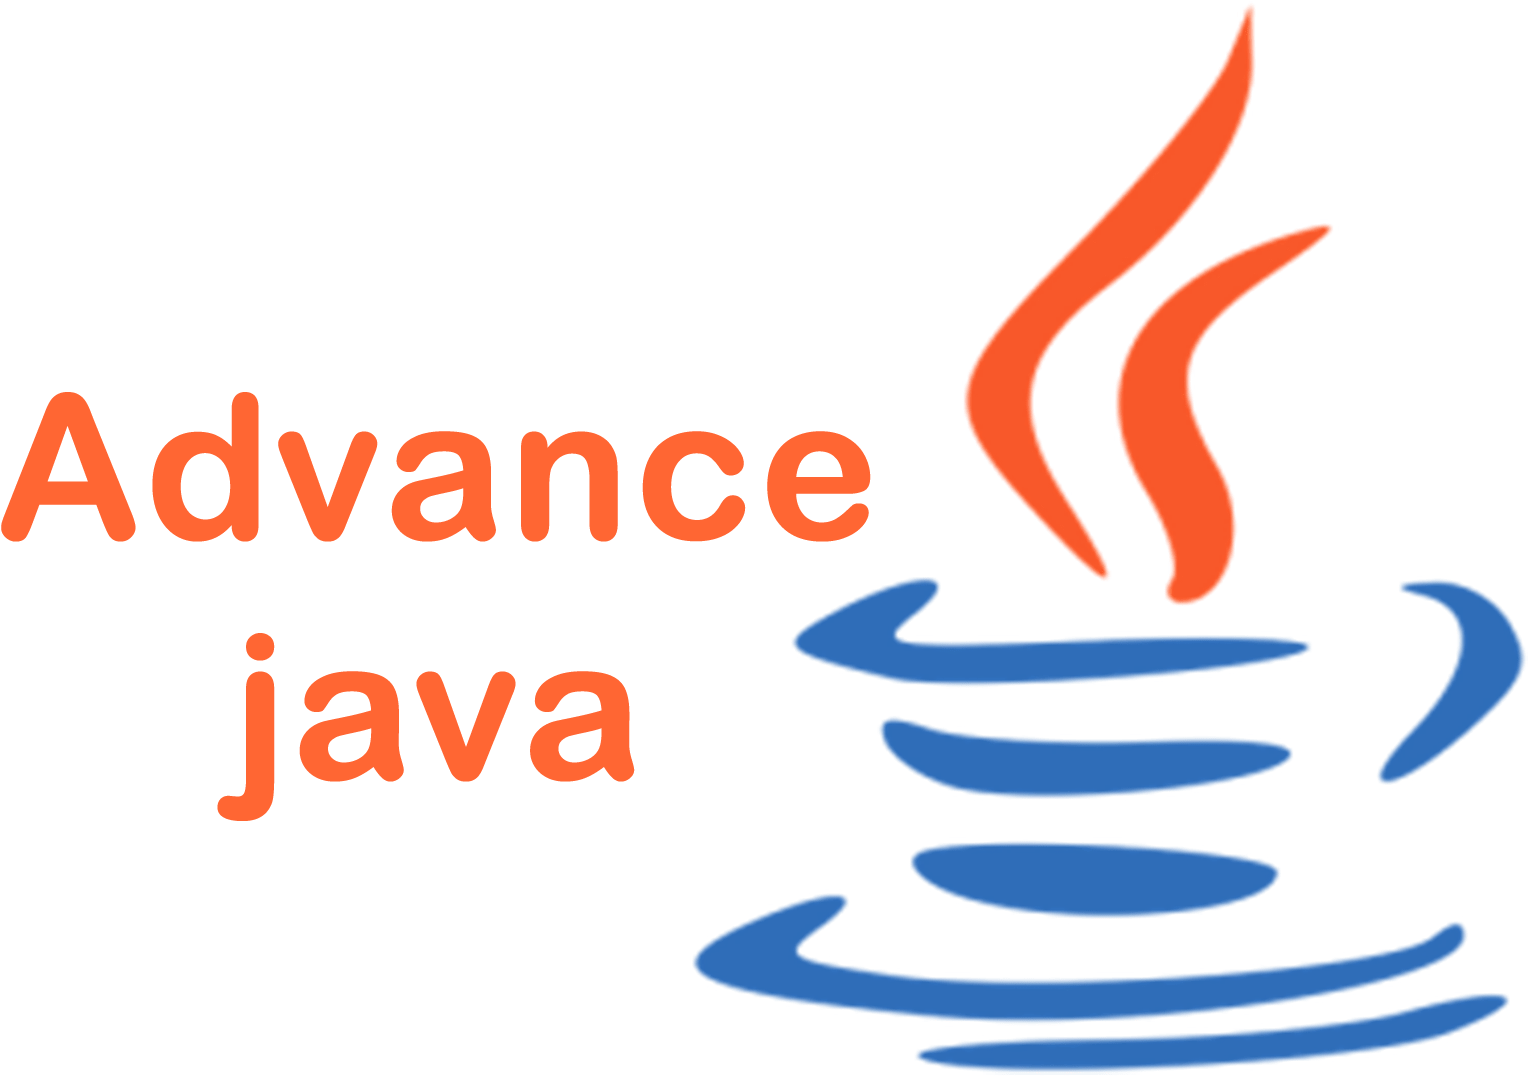 Download Advanced Java Training PNG Image with No Background 